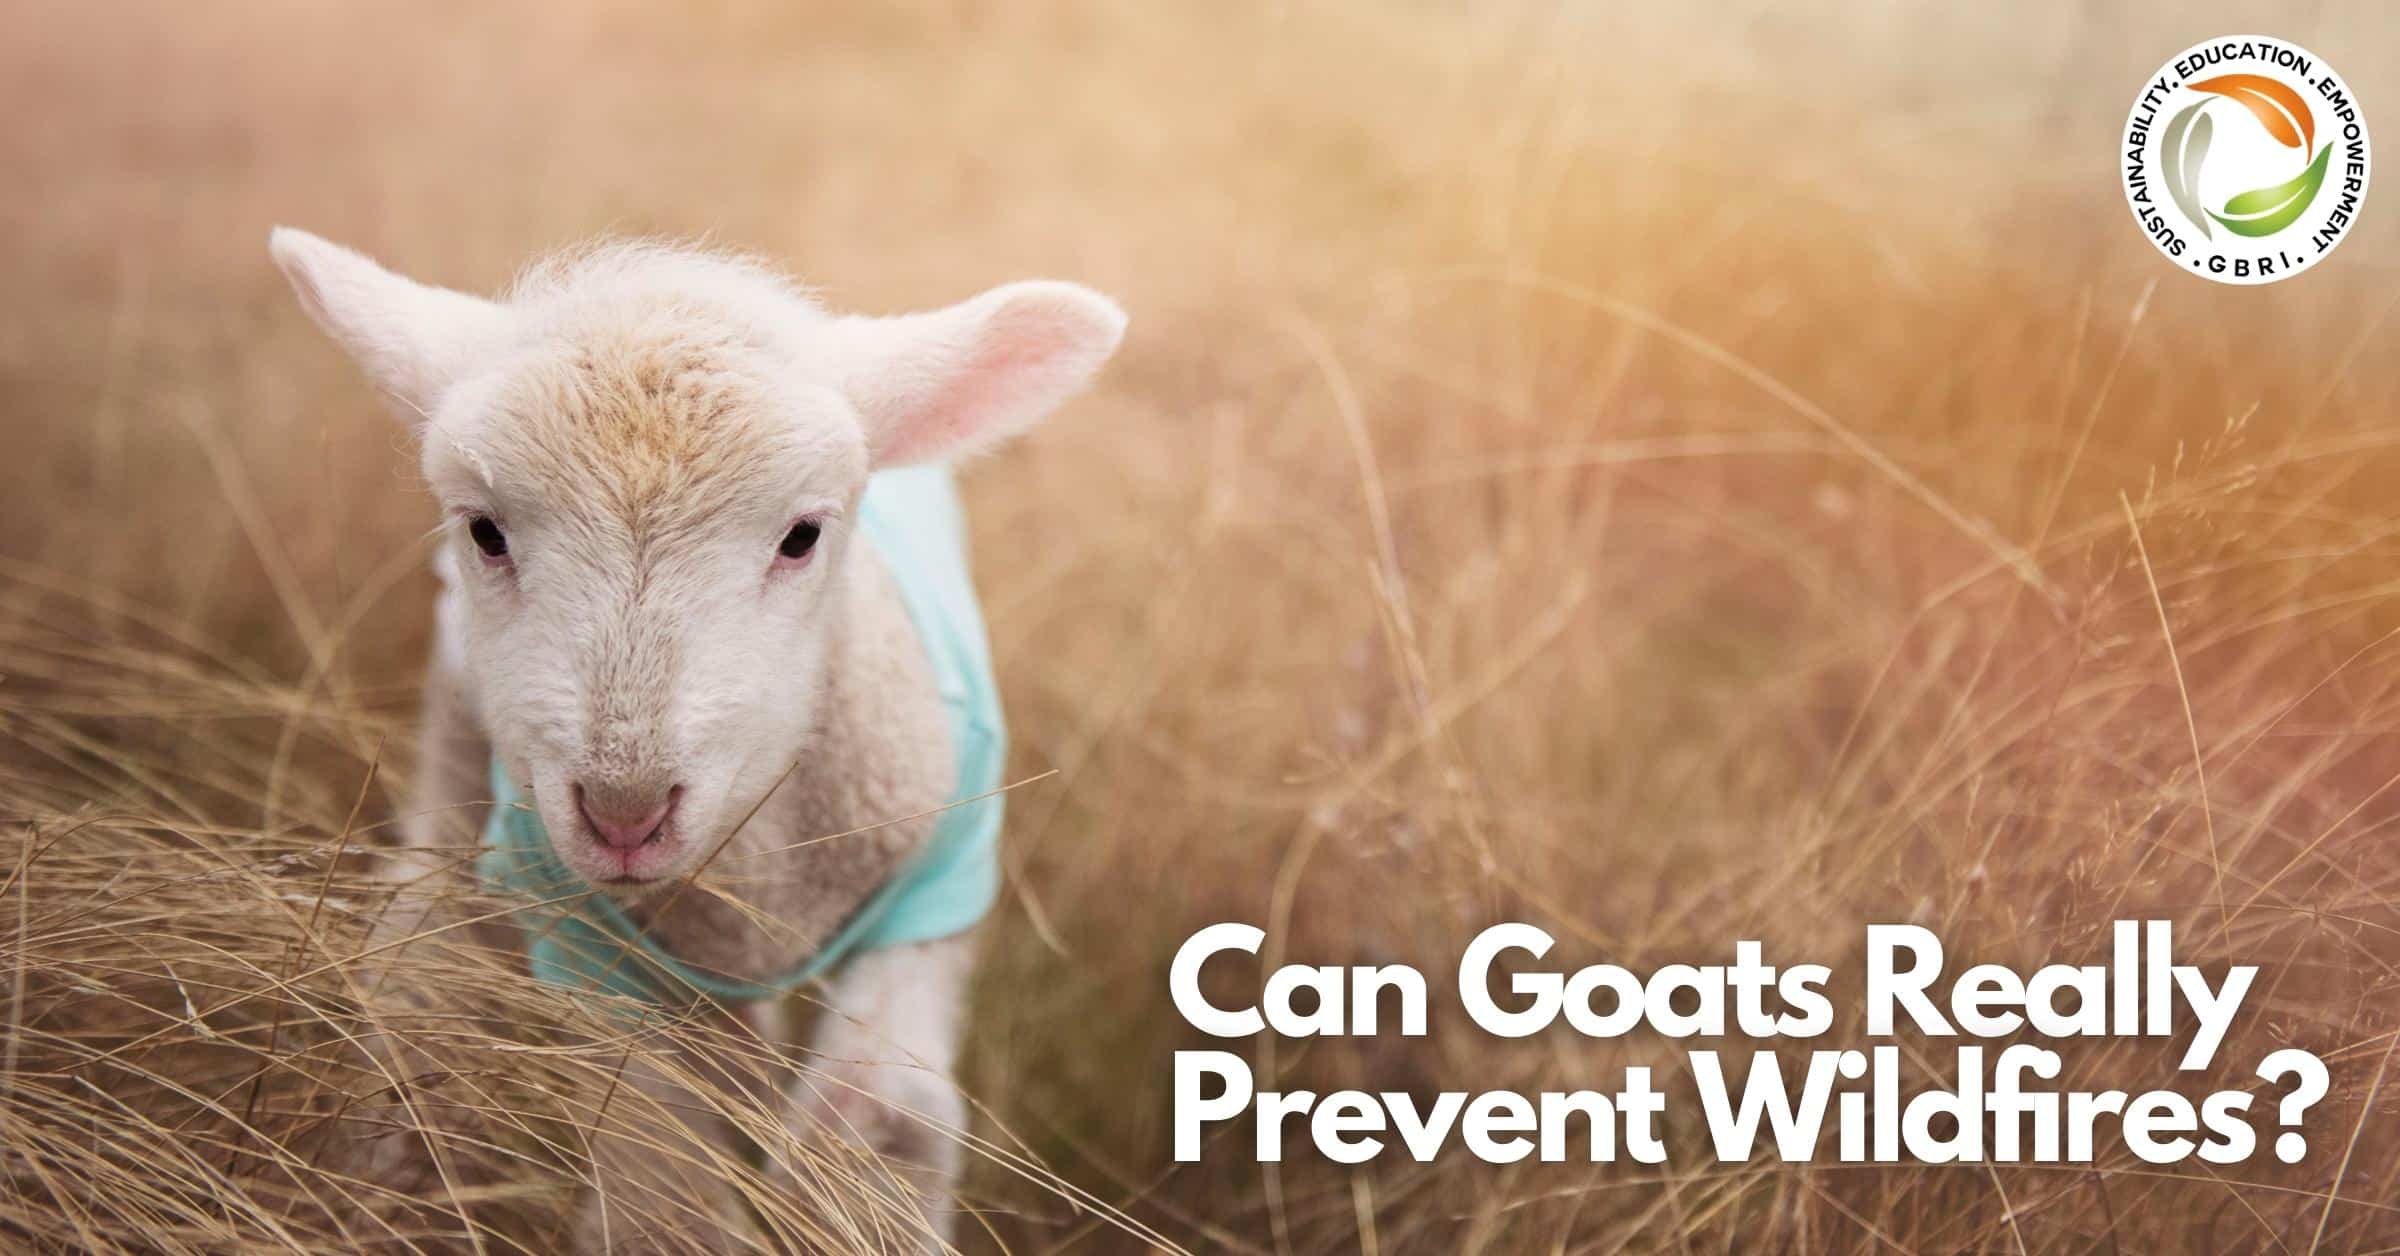 Can Goats Really Prevent Wildfires?